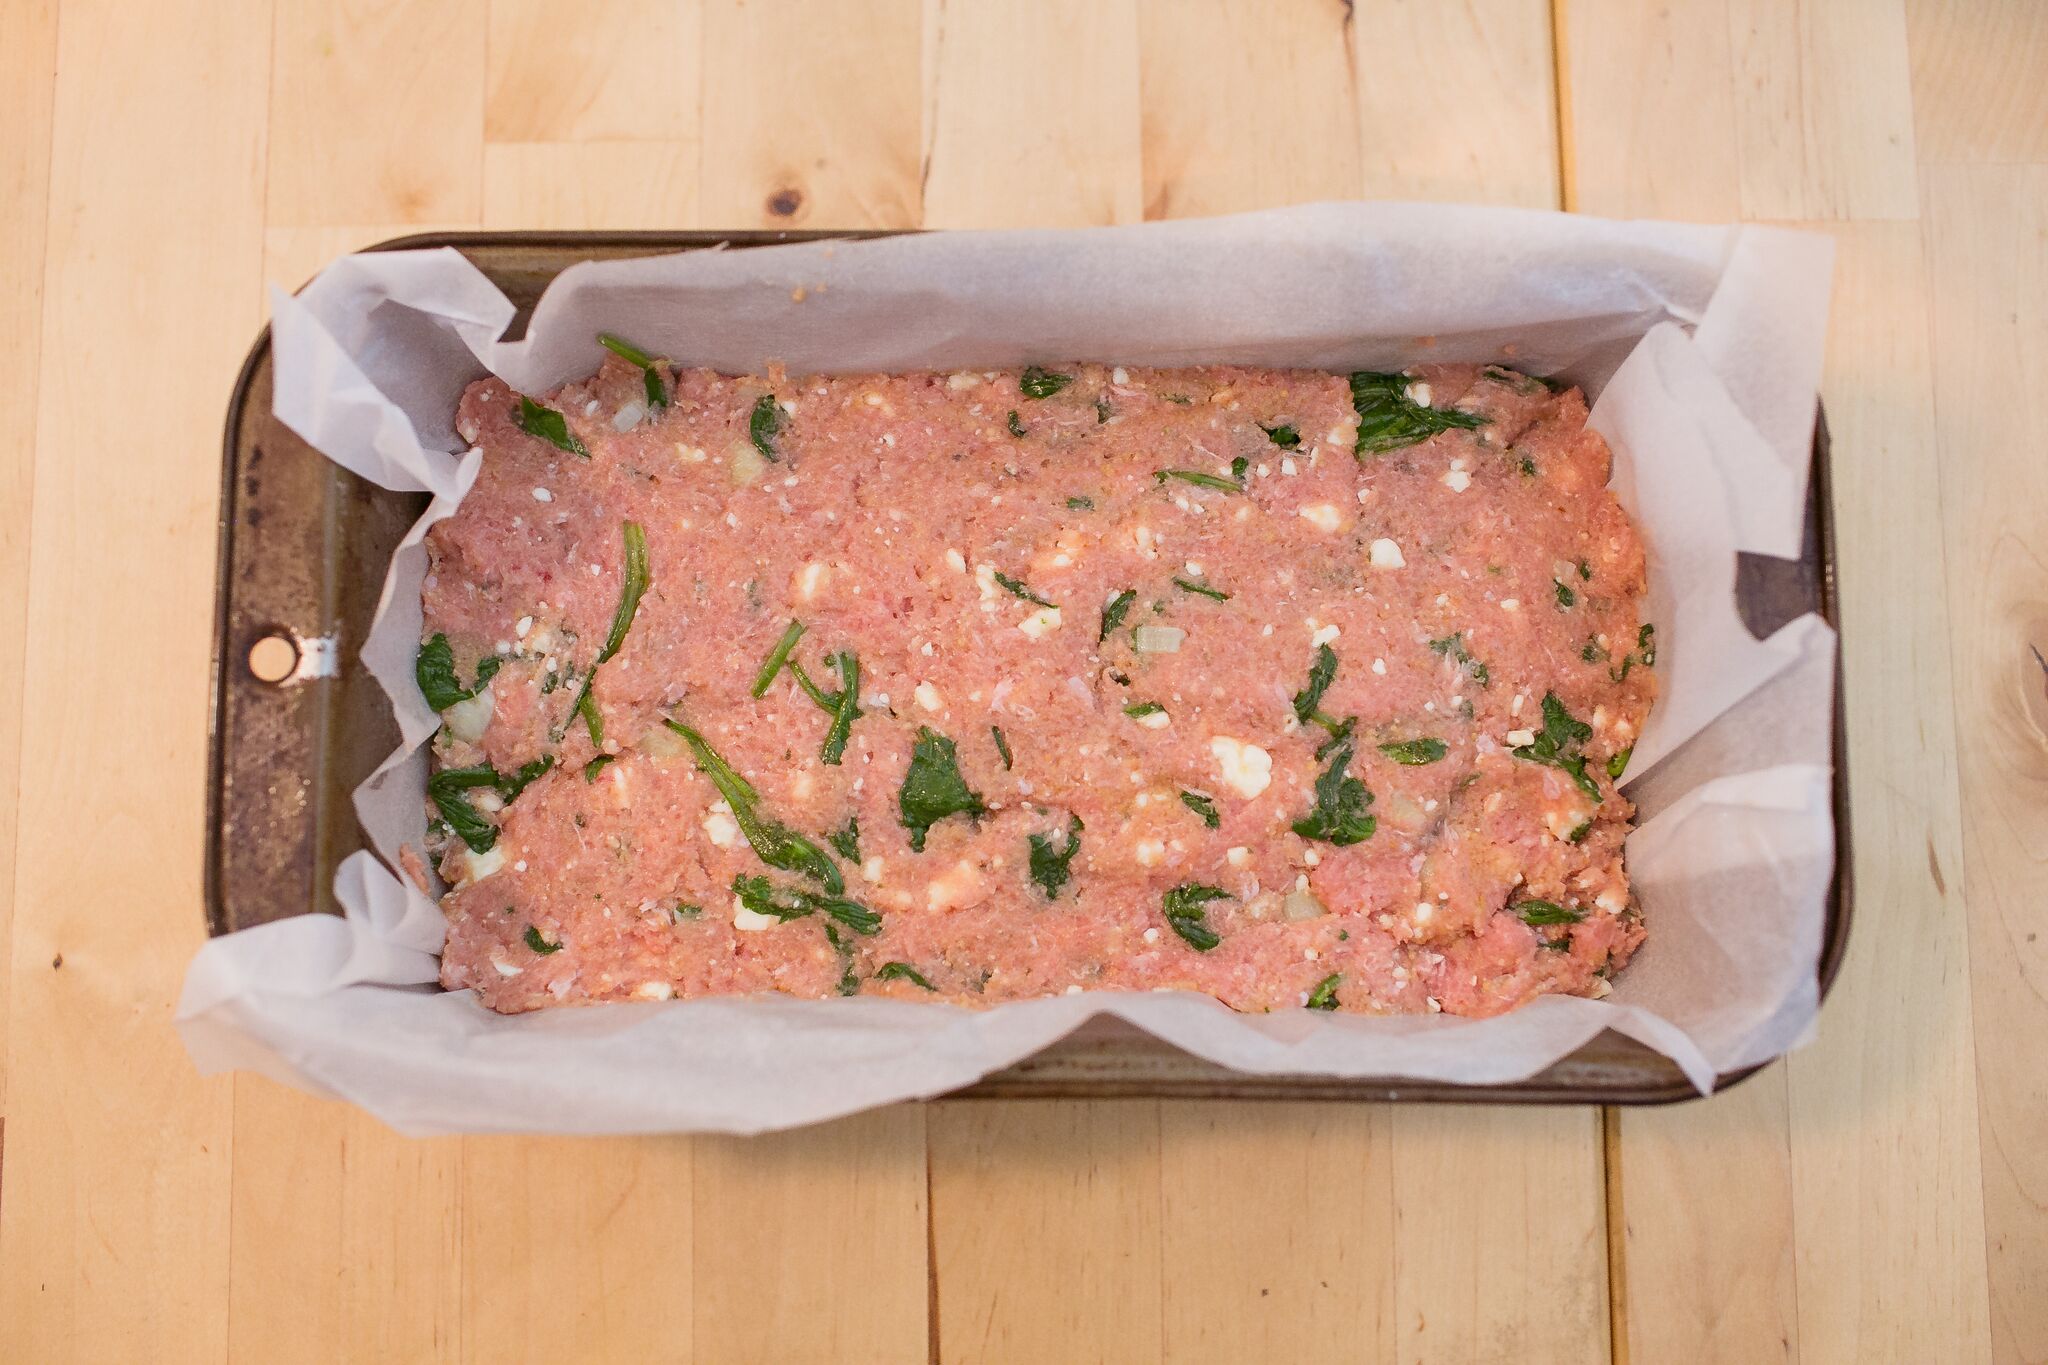 Add meat mixture to a loaf pan lined with parchment paper